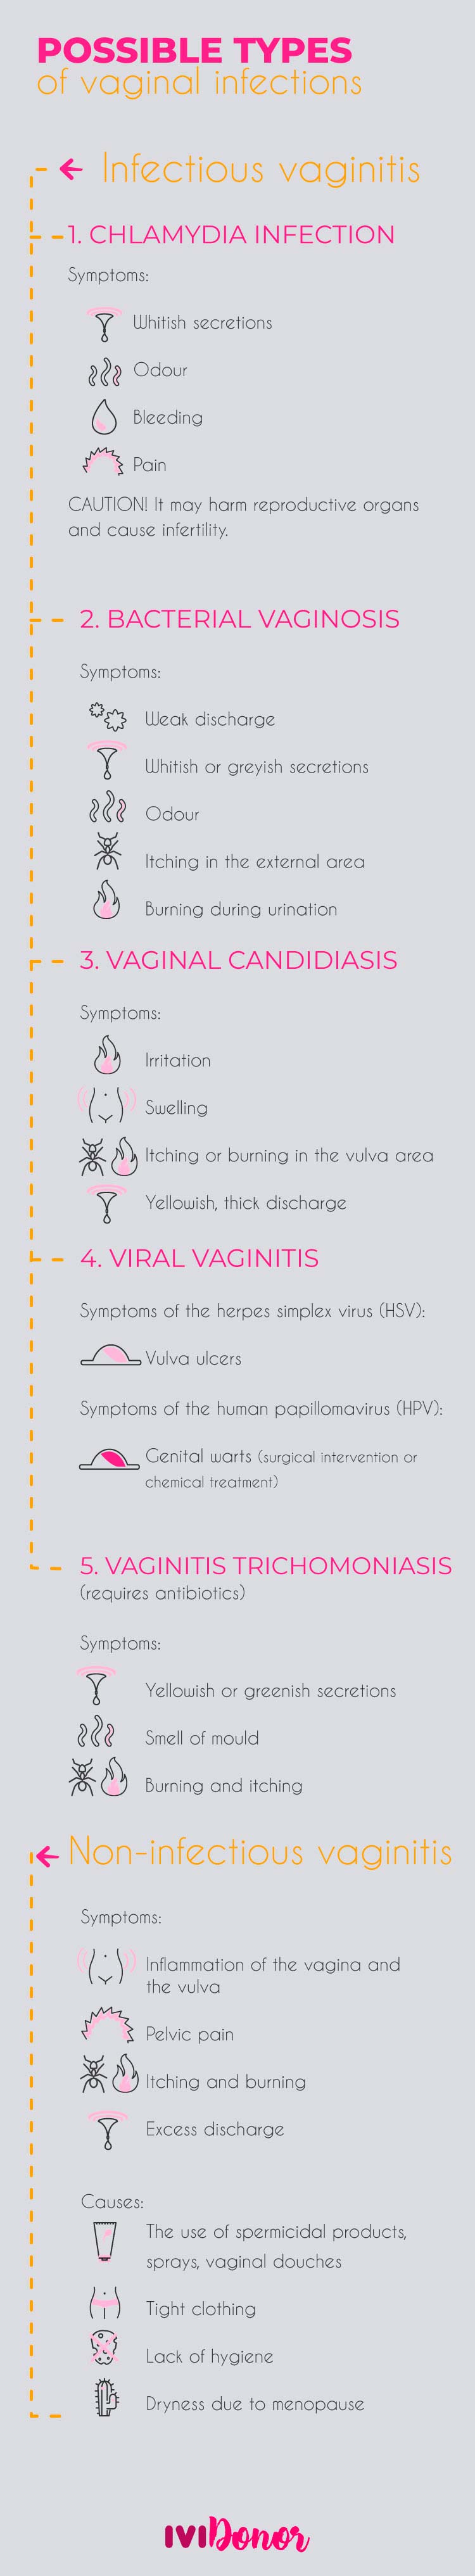 TYPES OF VAGINAL INFECTIONS